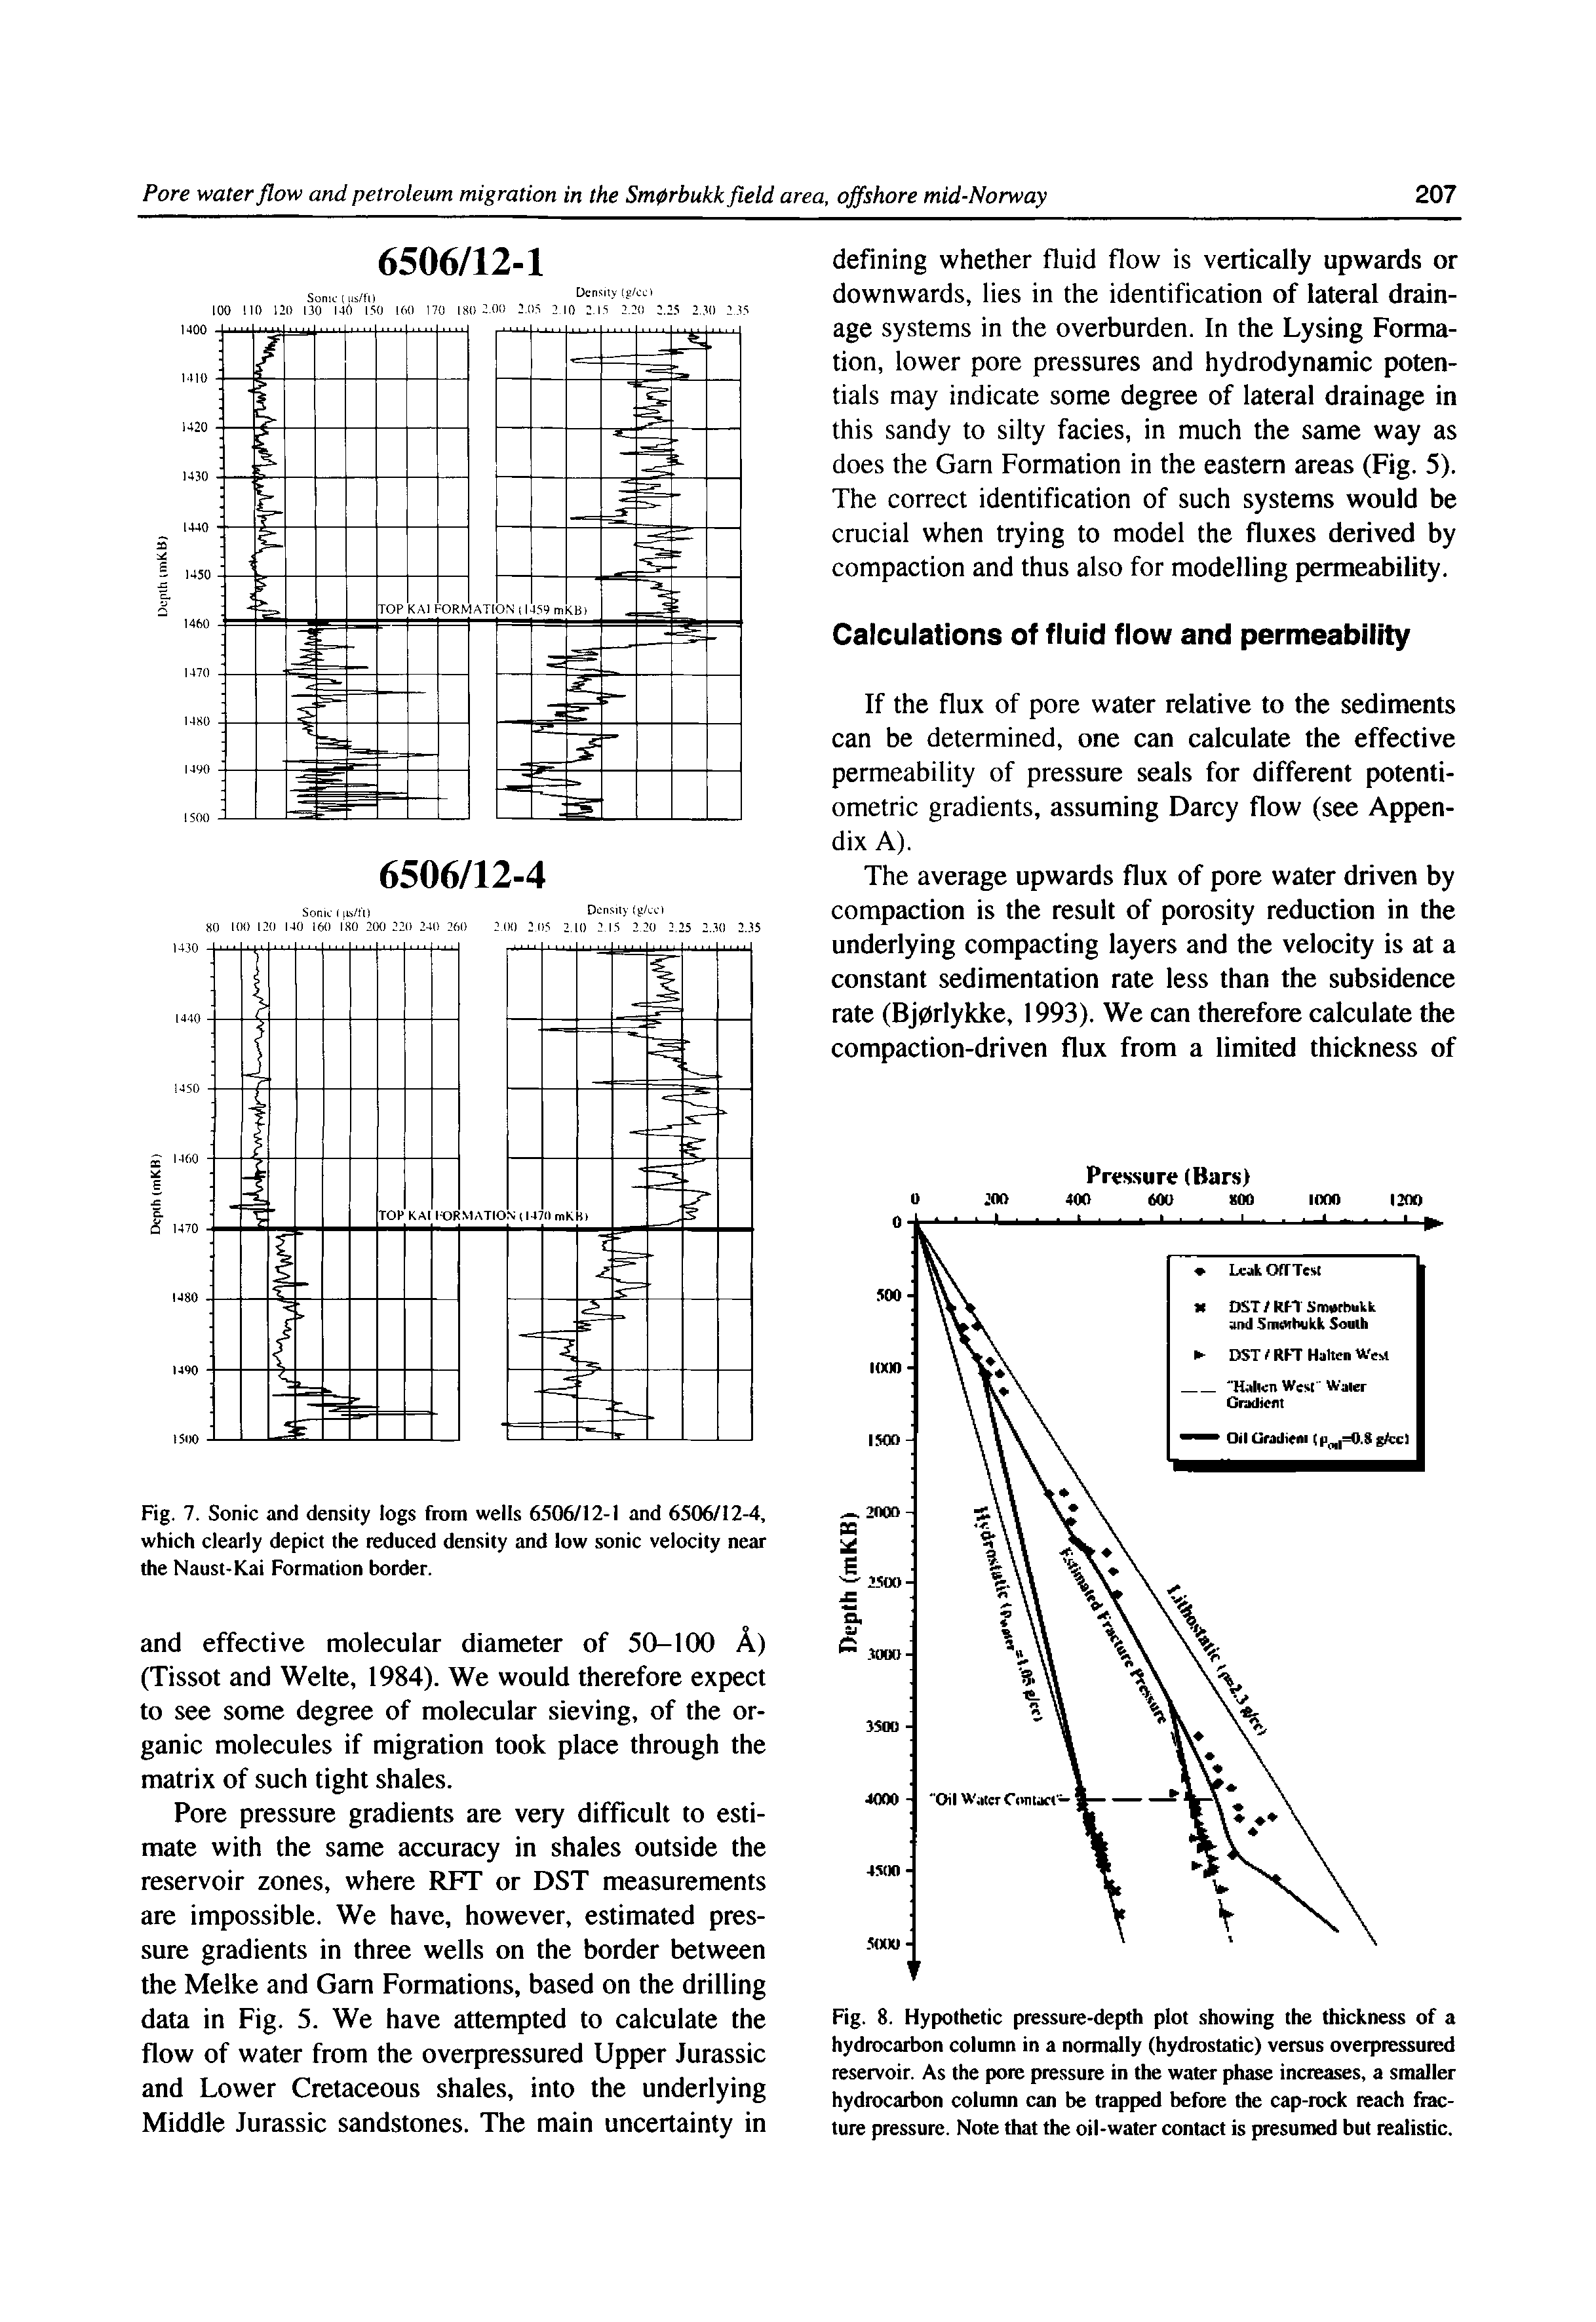 Fig. 8. Hypothetic pressure-depth plot showing the thickness of a hydrocarbon column in a normally (hydrostatic) versus overpressured reservoir. As the pore pressure in the water phase increases, a smaller hydrocarbon column can be trapped before the cap-rock reach hac-ture pressure. Note that the oil-water contact is presumed but realistic.